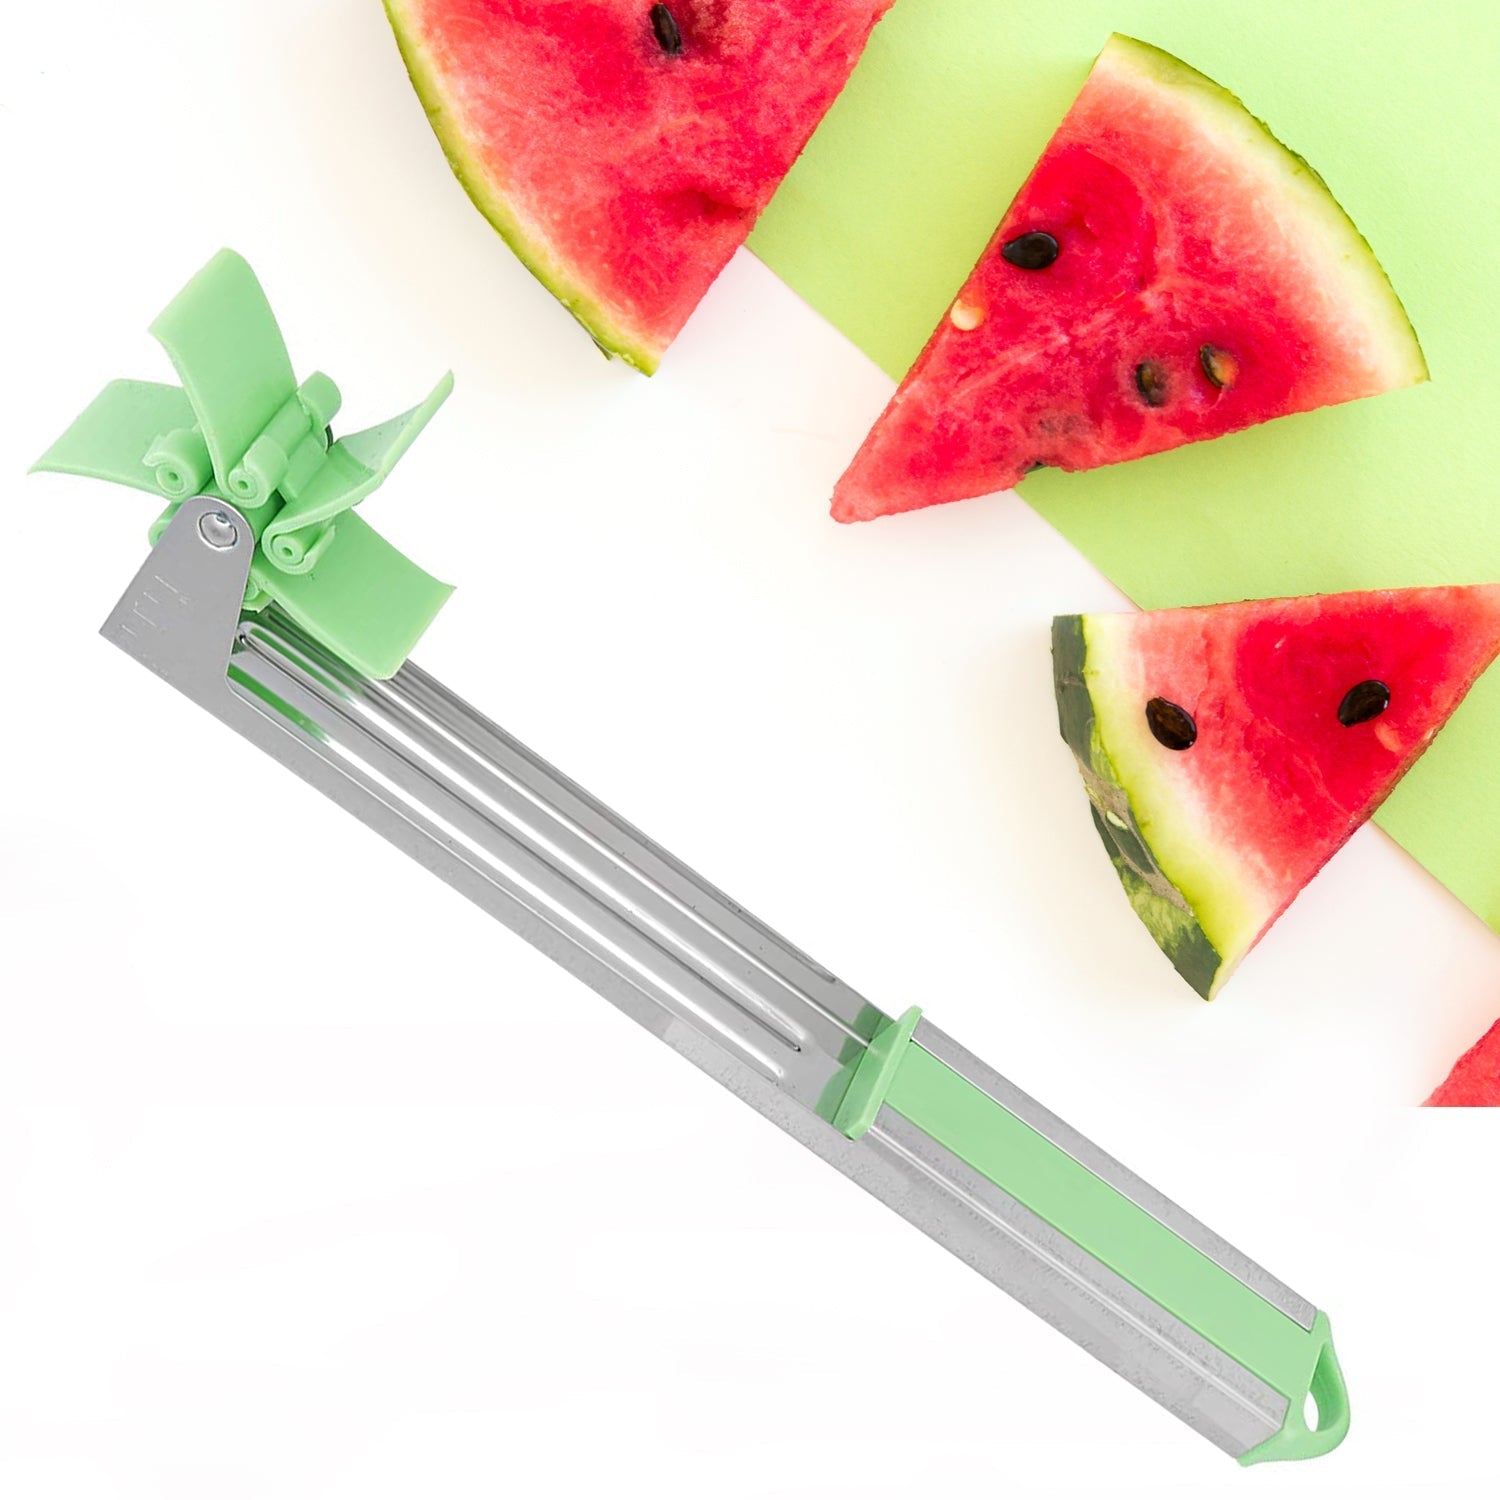 7160 Stainless Steel Washable Watermelon Cutter Windmill Slicer Cutter Peeler for Home/Smart Kitchen Tool Easy to Use JK Trends